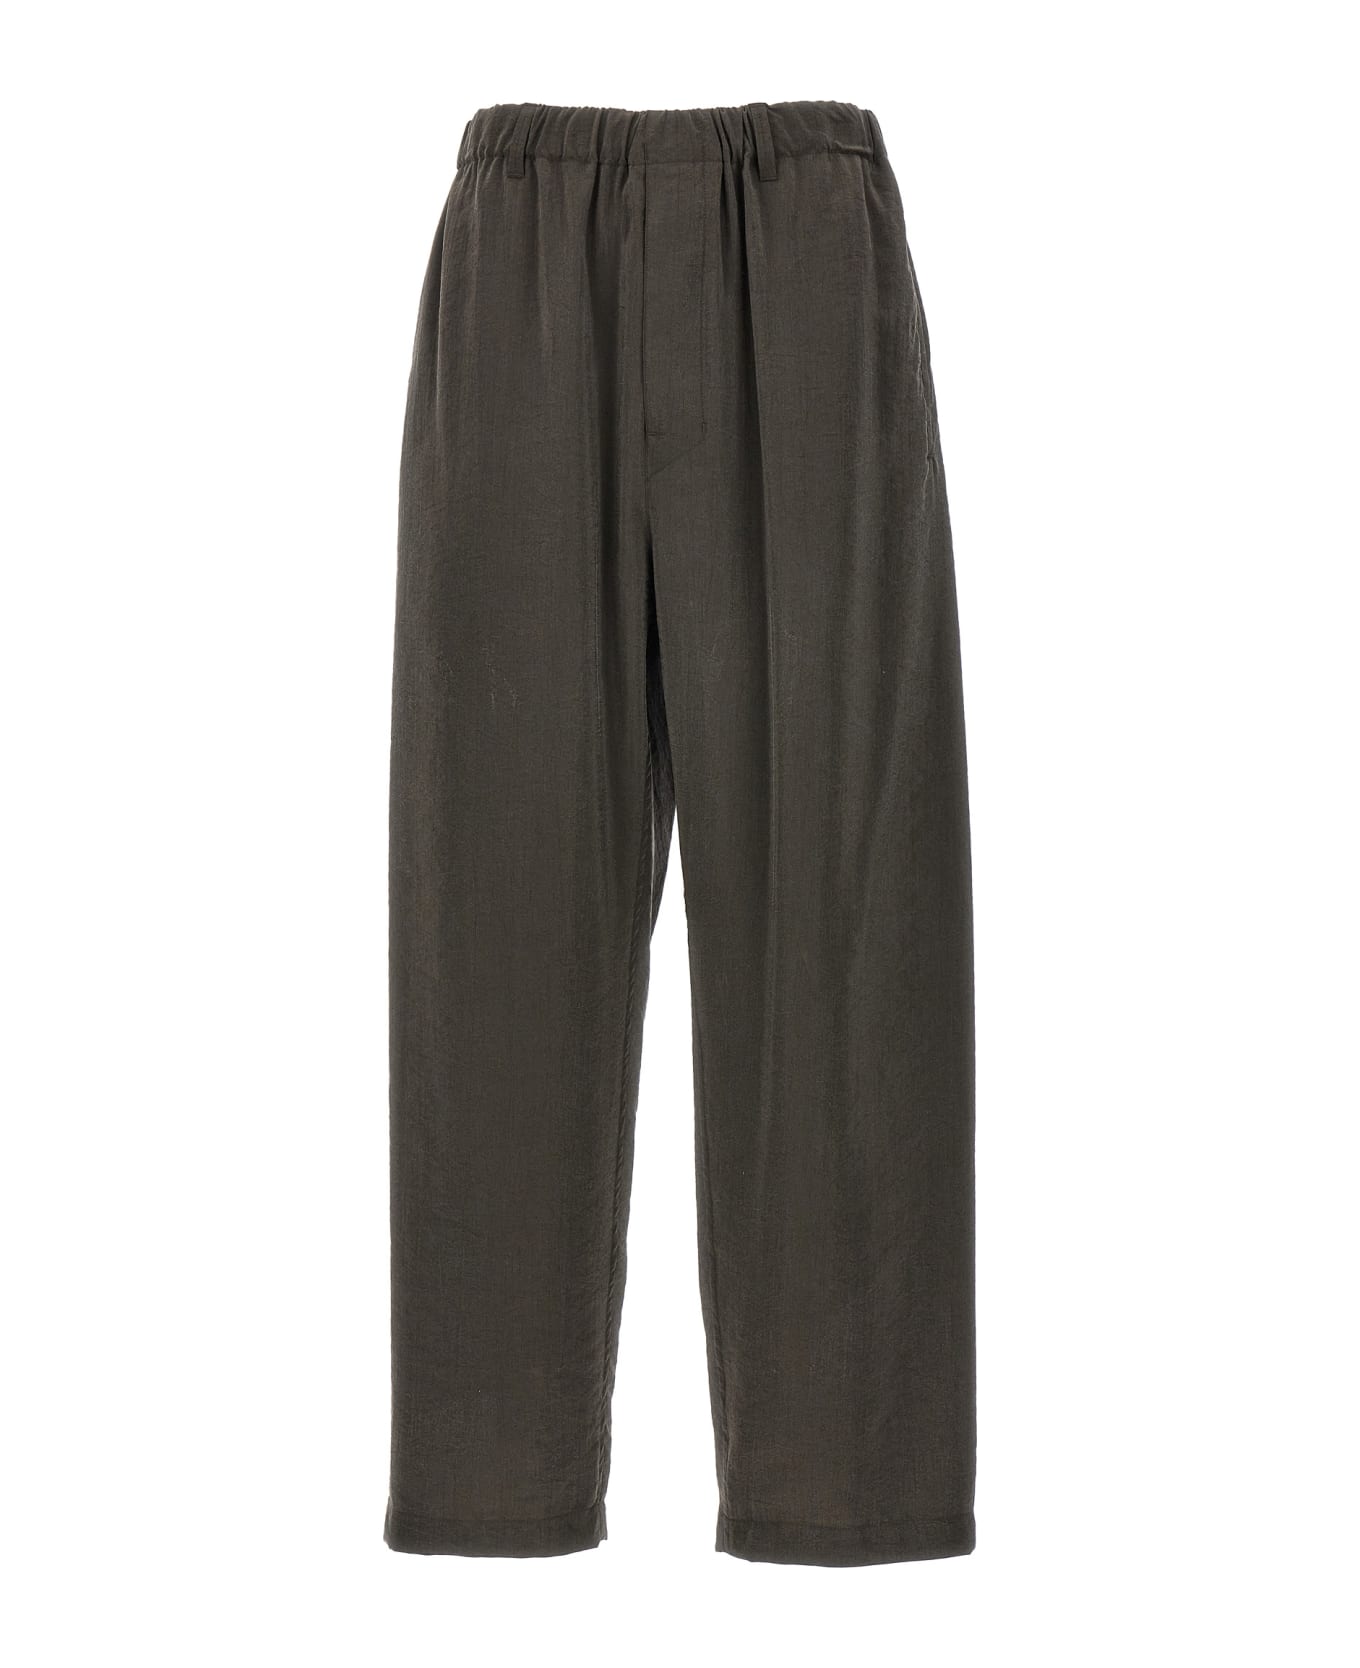 Lemaire 'relaxed' Trousers - Brown ボトムス